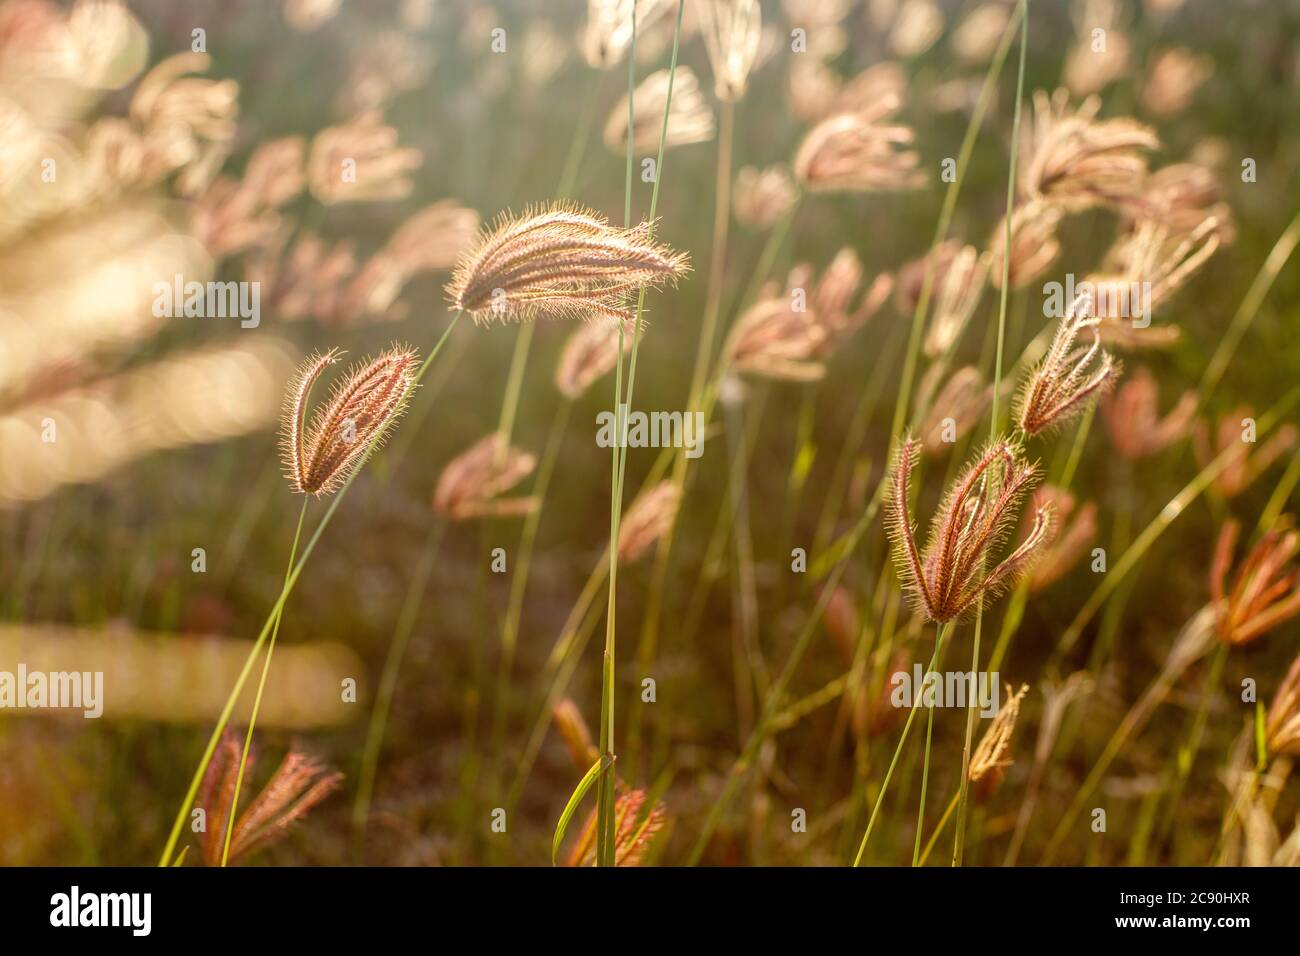 Chloris gayana or Rhodes grass in sunset light. Rural landscape. Bali Island, Indonesia. Natural background. Soft focus. Stock Photo